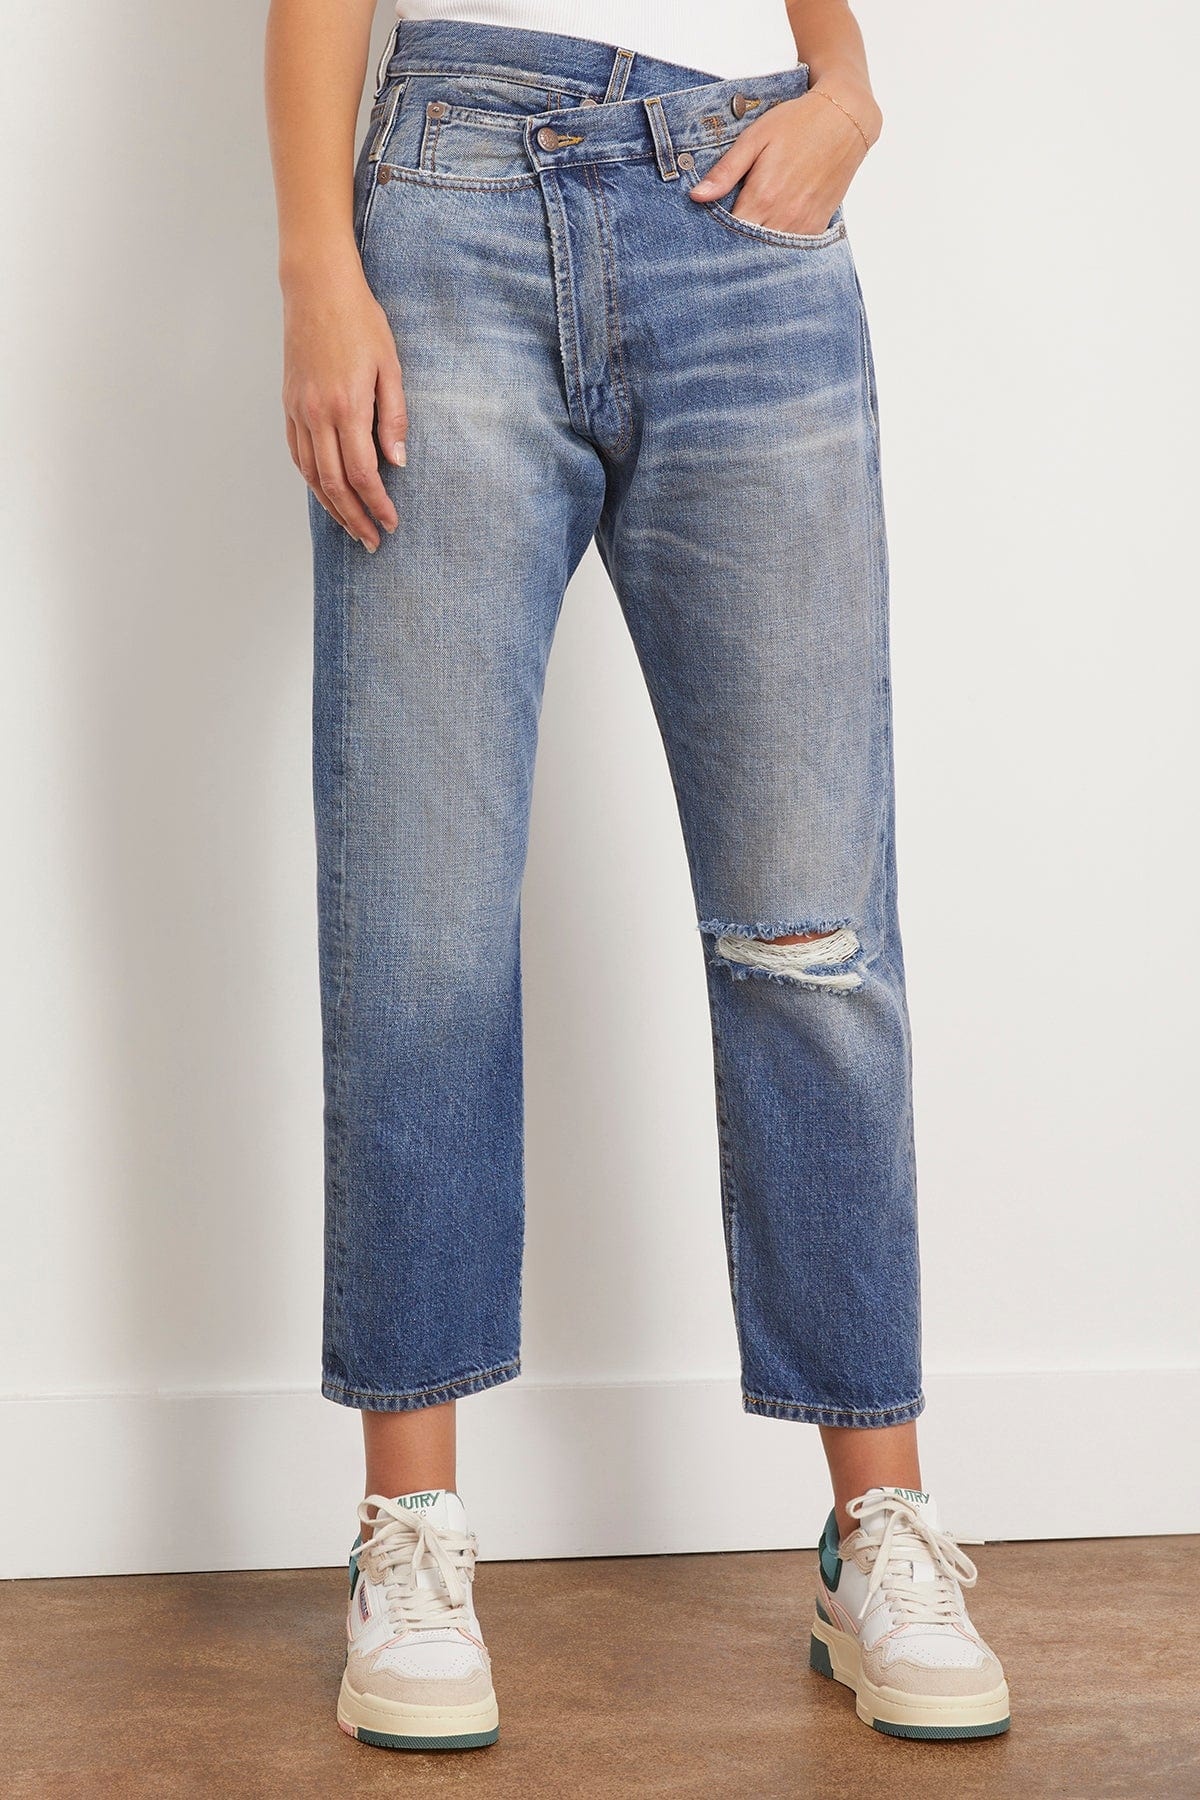 Crossover Jean in Amber Blue - 3